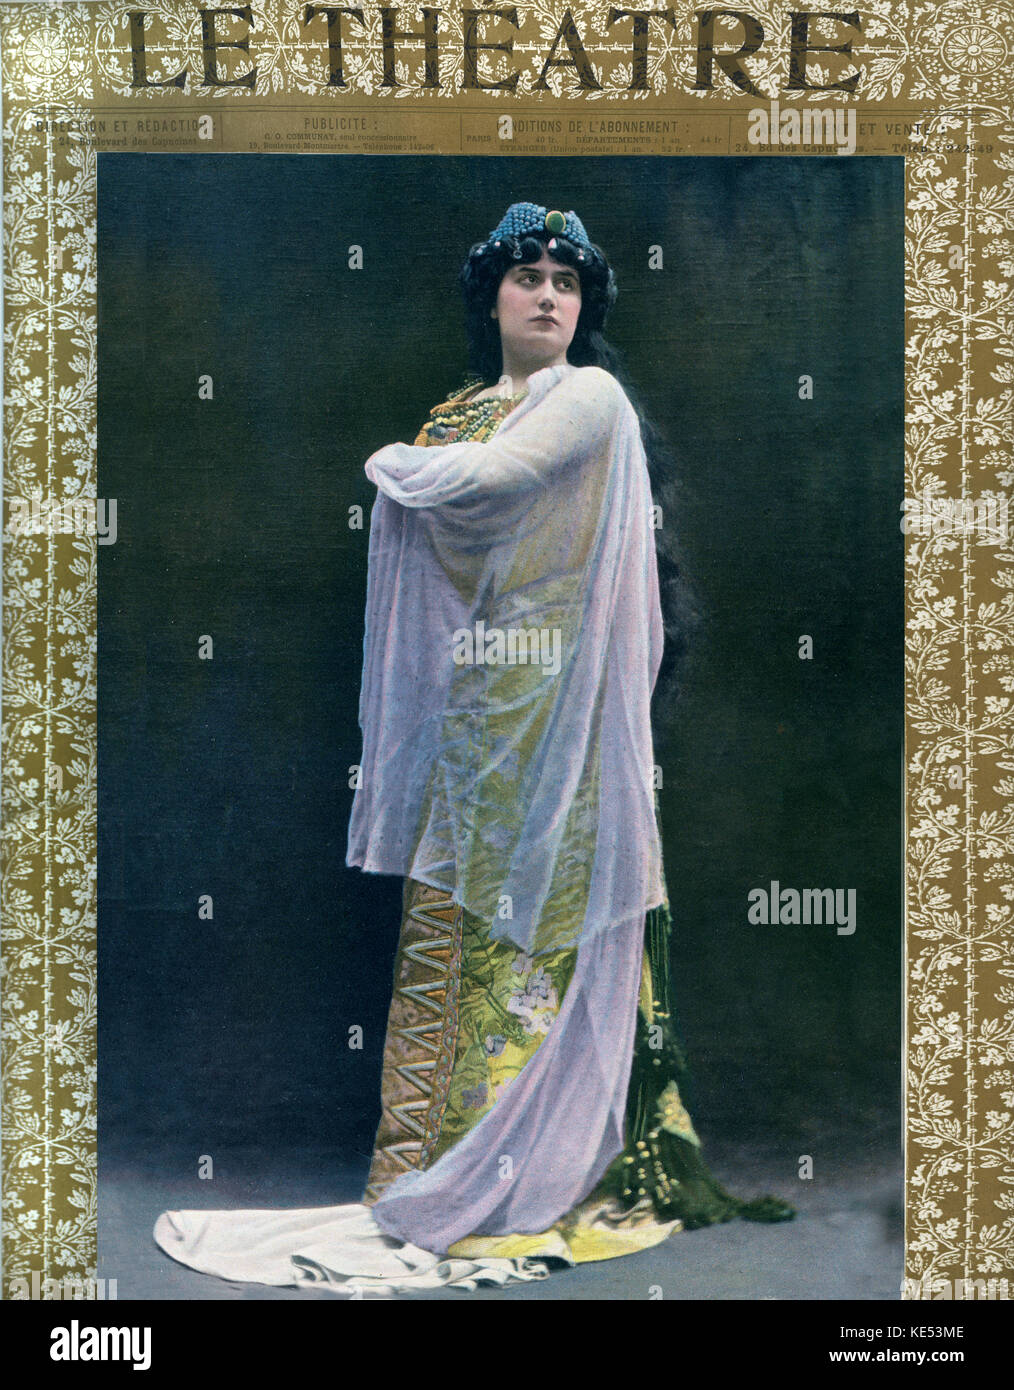 Agnes Borgo as Salammbo in 'Salammbo' at l'Academie Nationale de Musique. Opera by Ernest Reyer based on novel by Gustave Flaubert.  Cover Le Theatre October 1904. AB:  French dramatic soprano 1879 - 1958.  ER: Frehc opera composer  1 December  1823 – 15  January   1909. Stock Photo